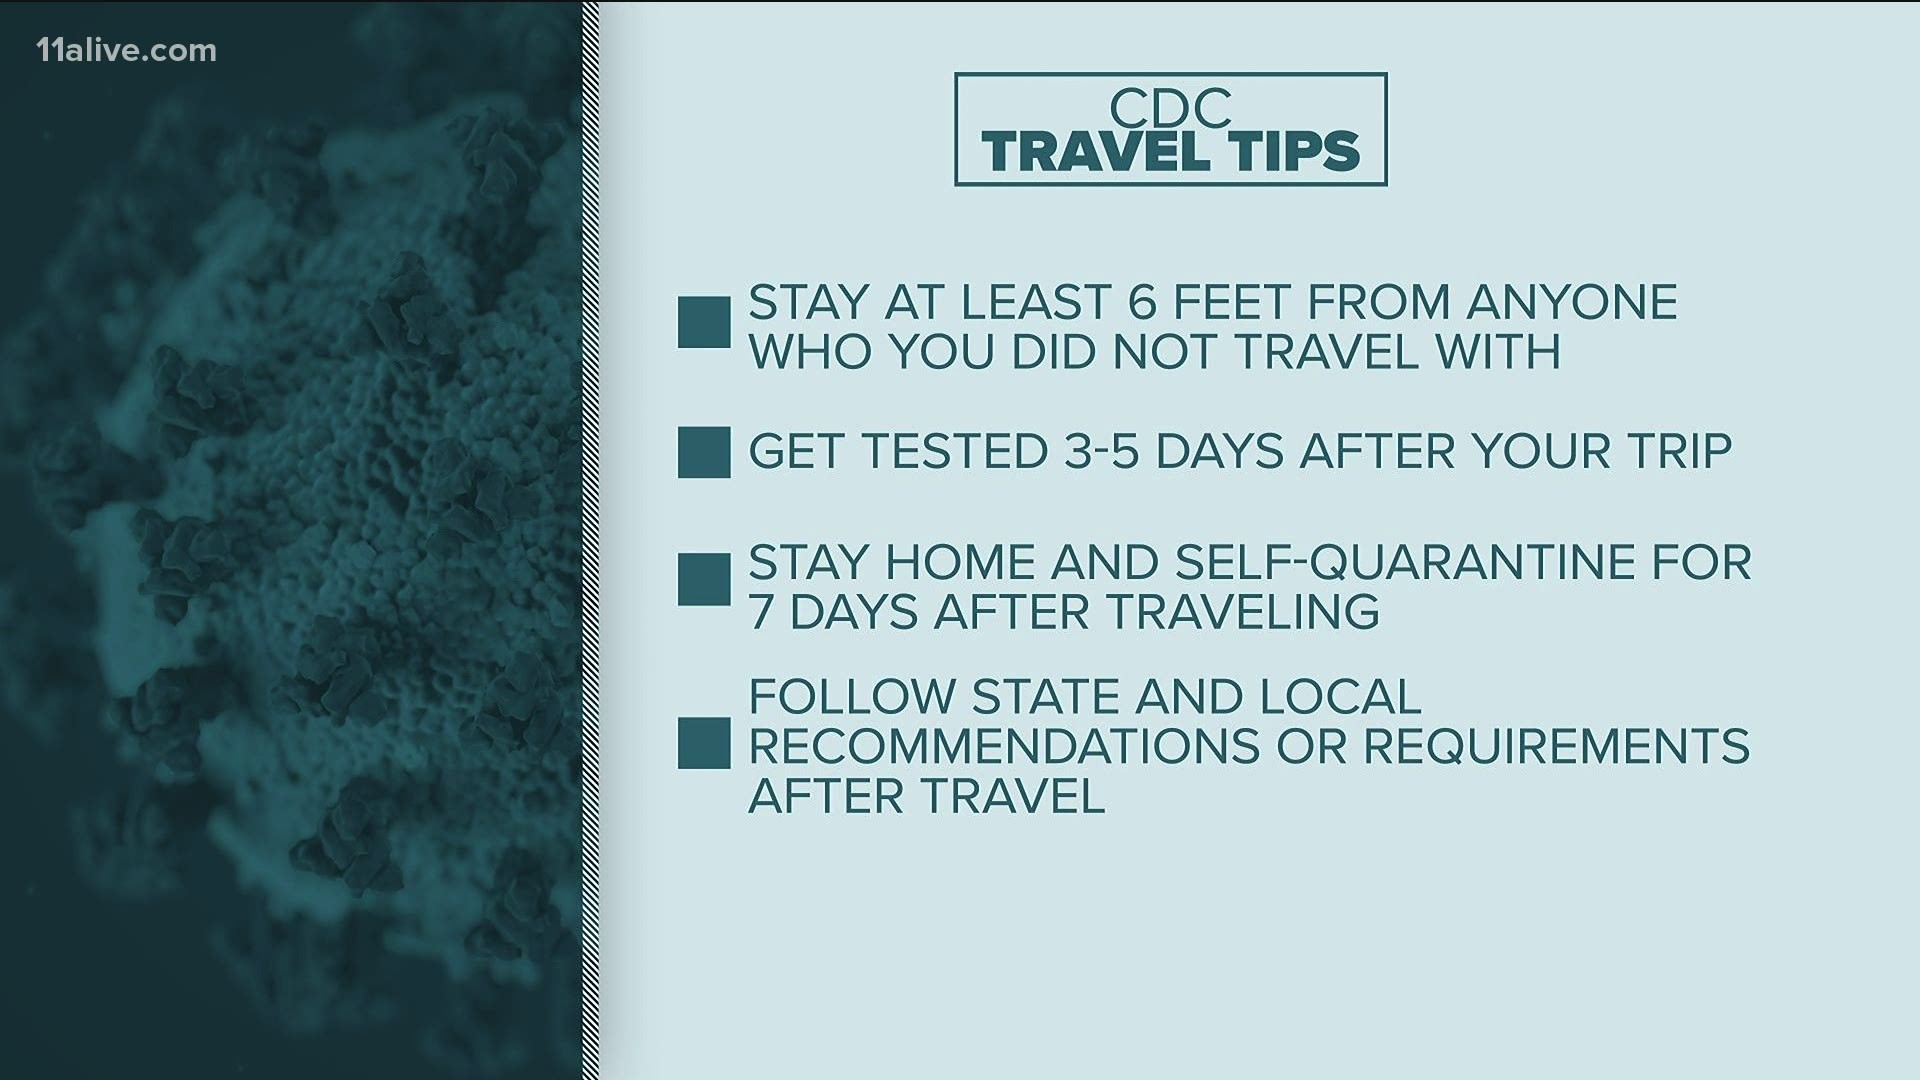 The CDC is discouraging travel but offered tips for people who must.